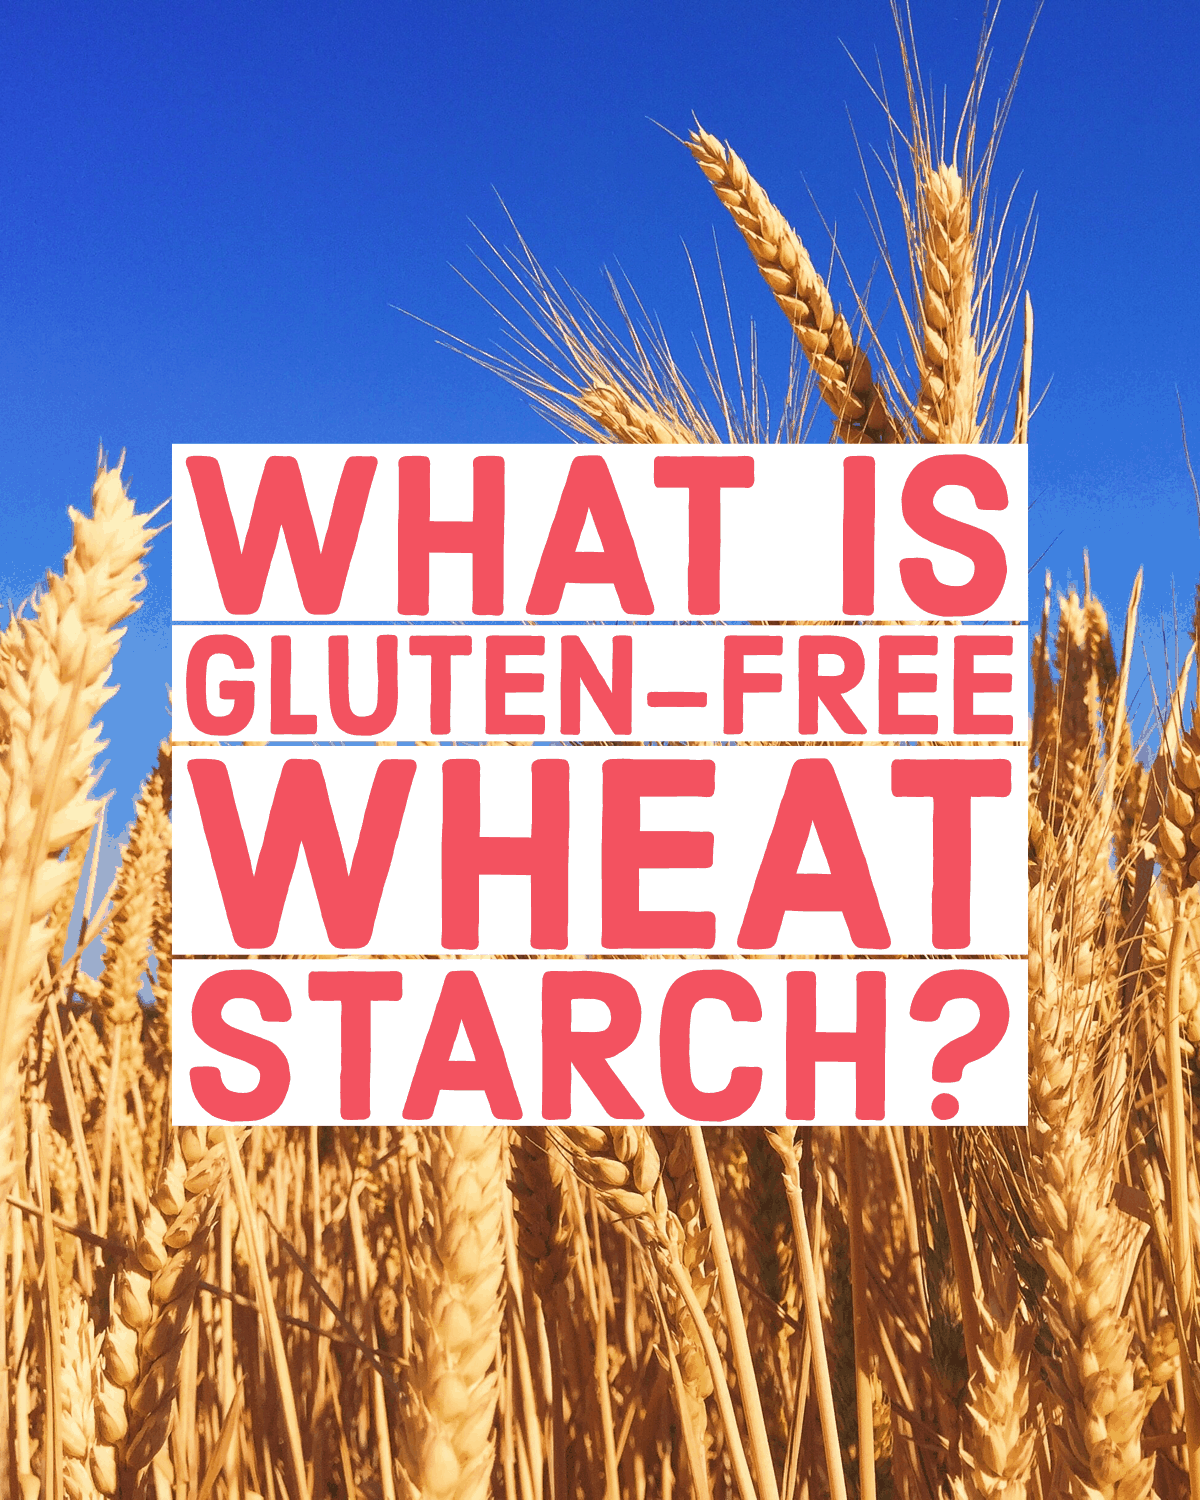 A field of wheat with vibrant blue sky, text overlay "what is gluten-free wheat starch?"